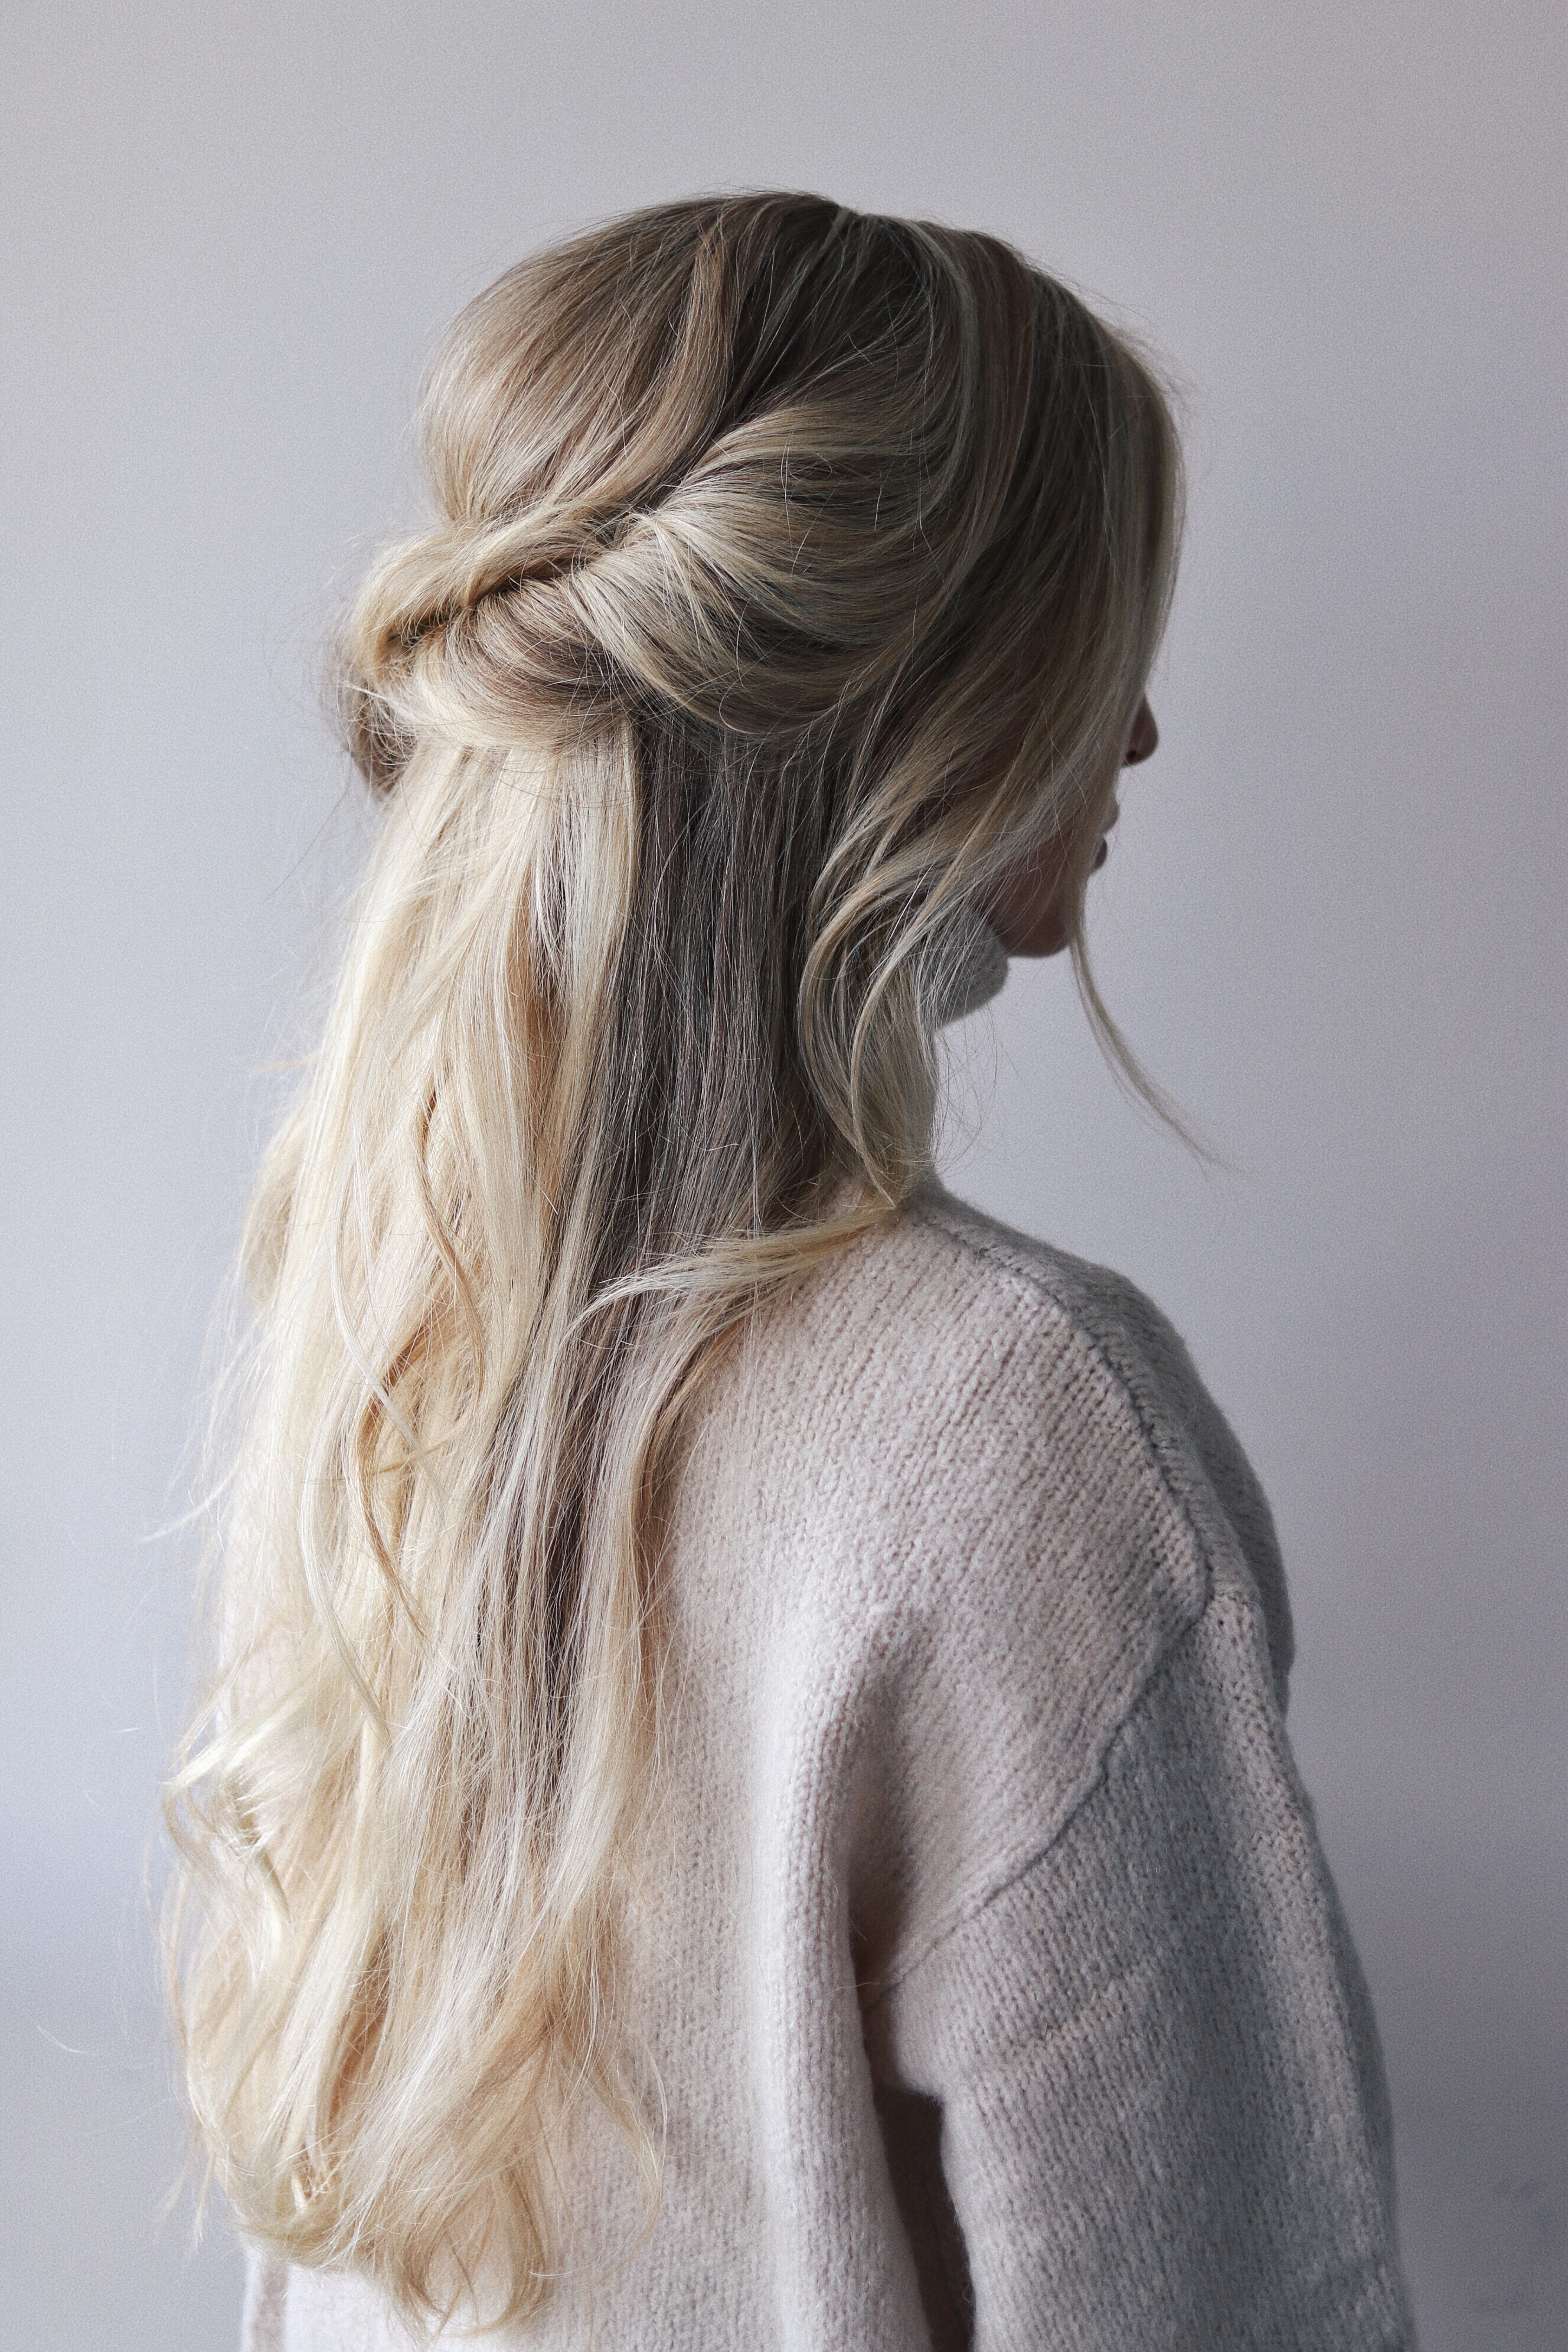 Easy Hairstyles, Up Down Hairstyle | www.alexgaboury.com